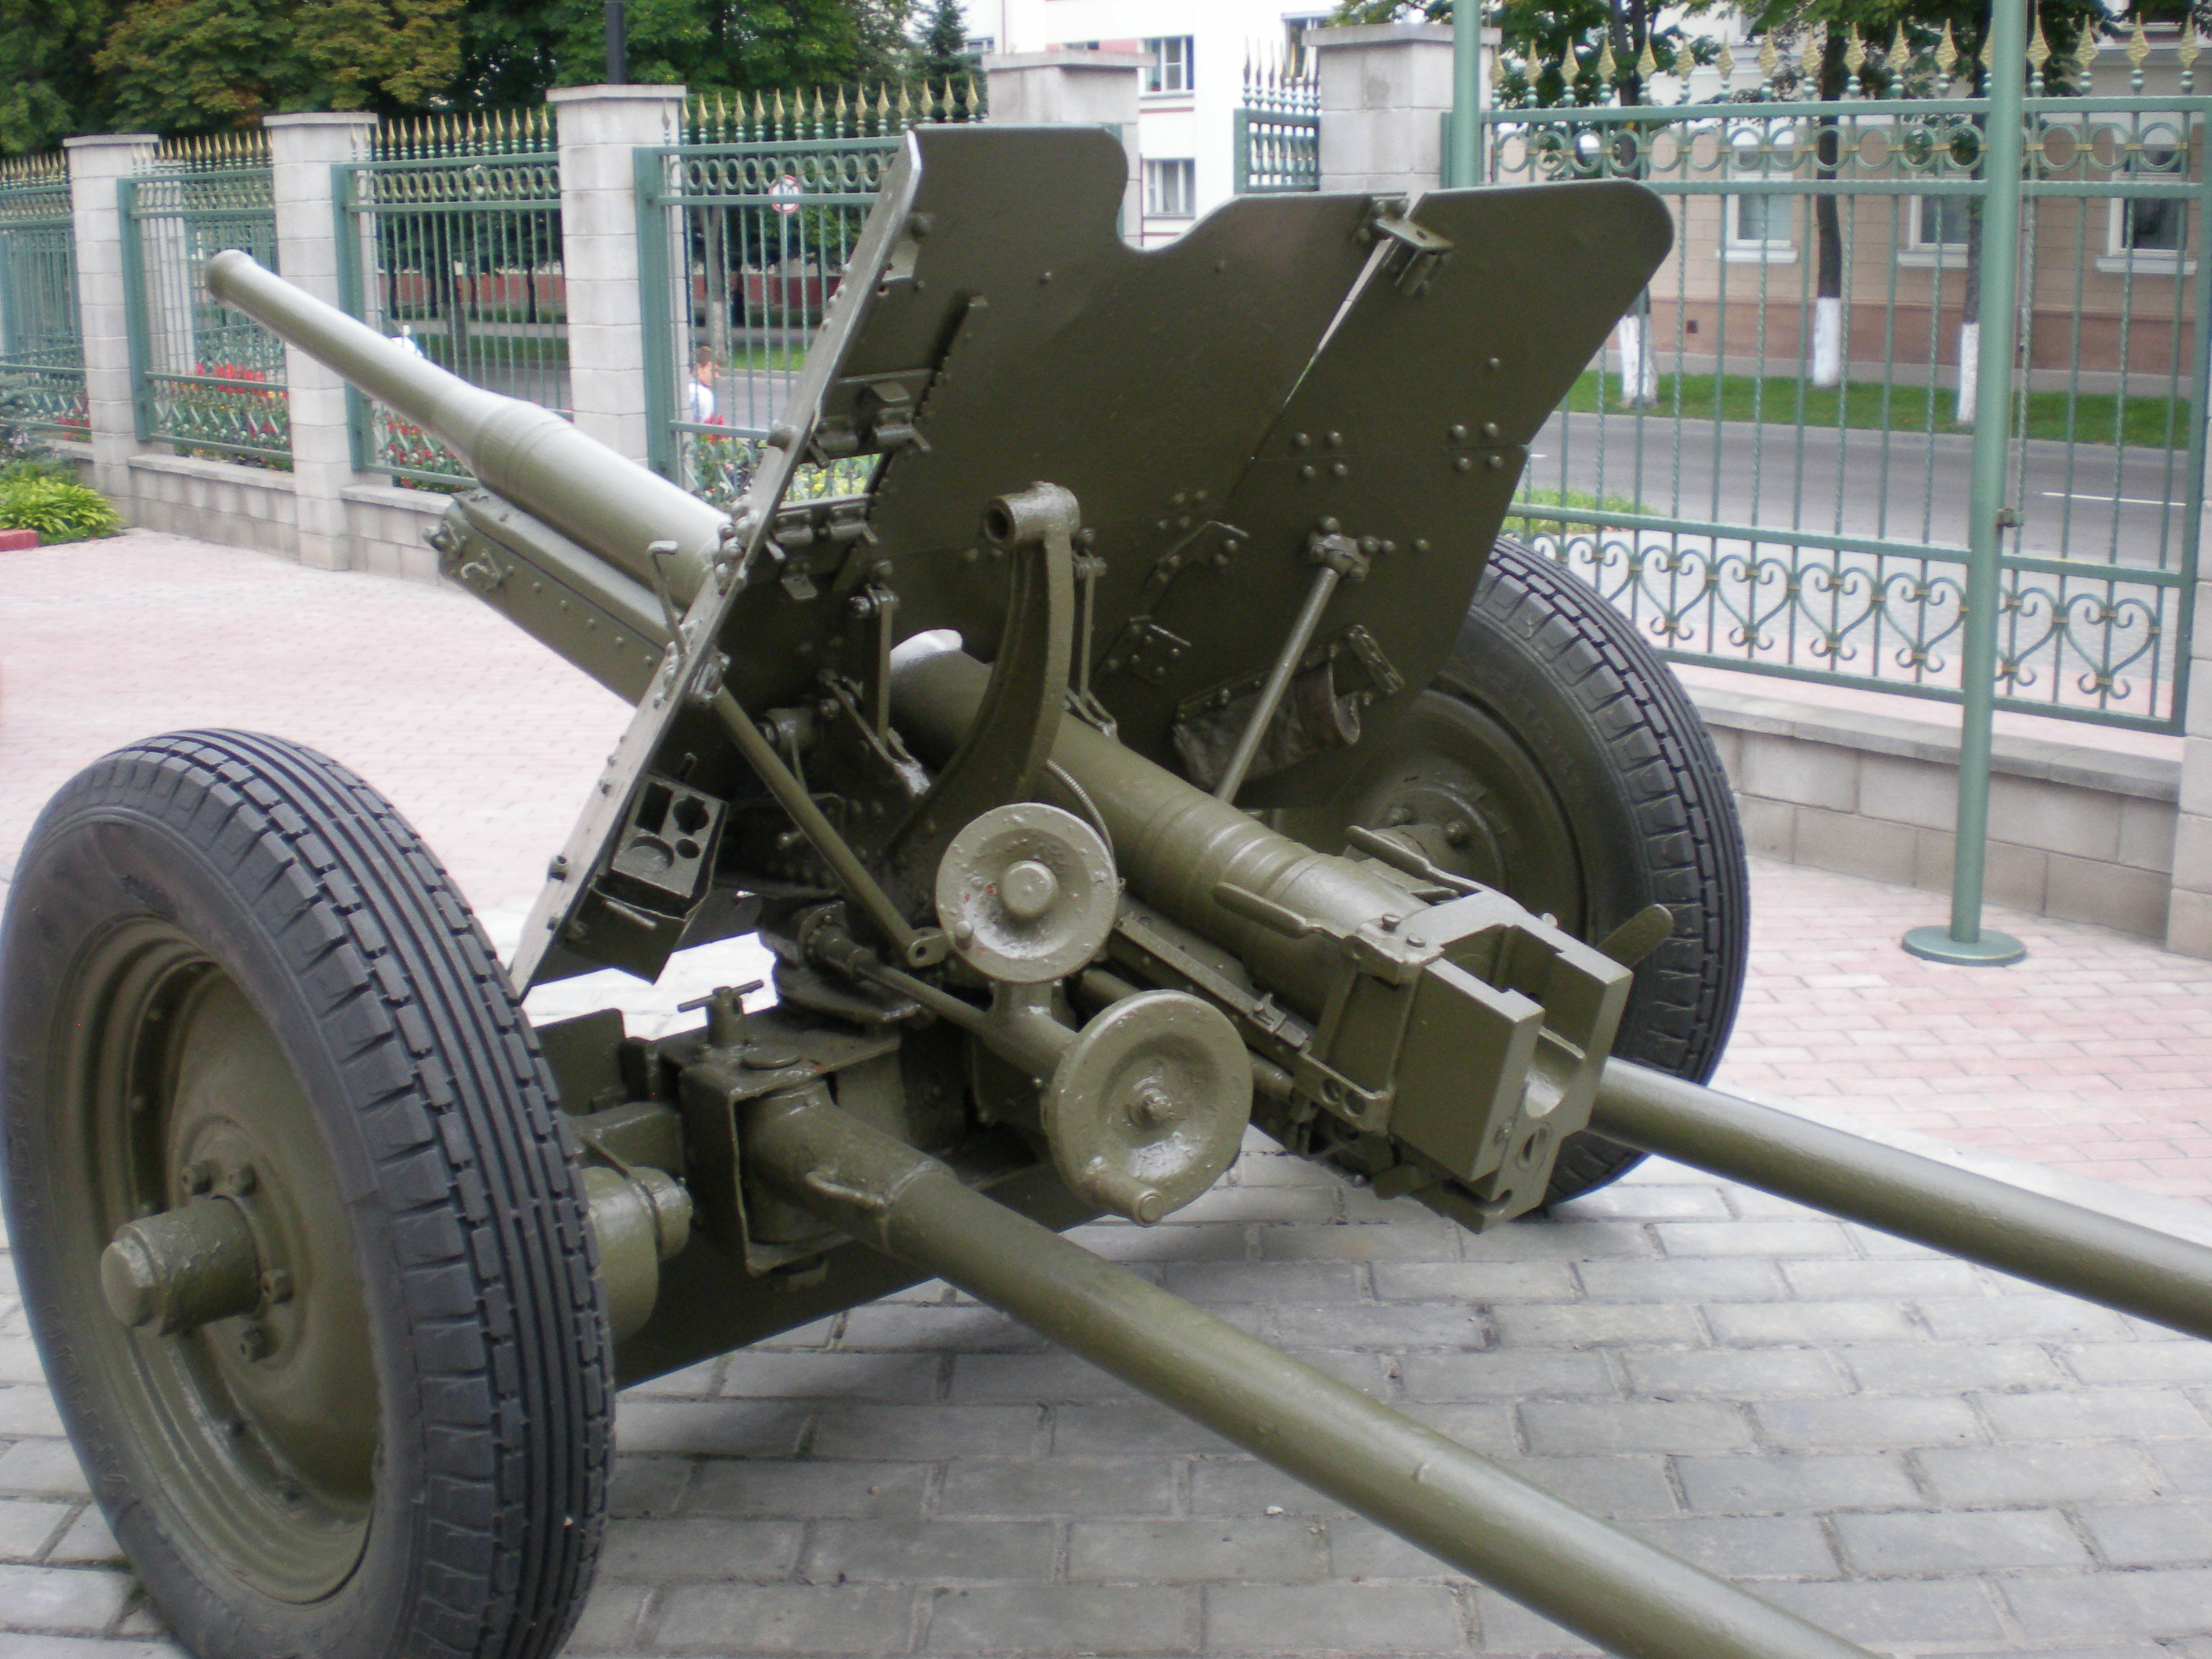 cannon military